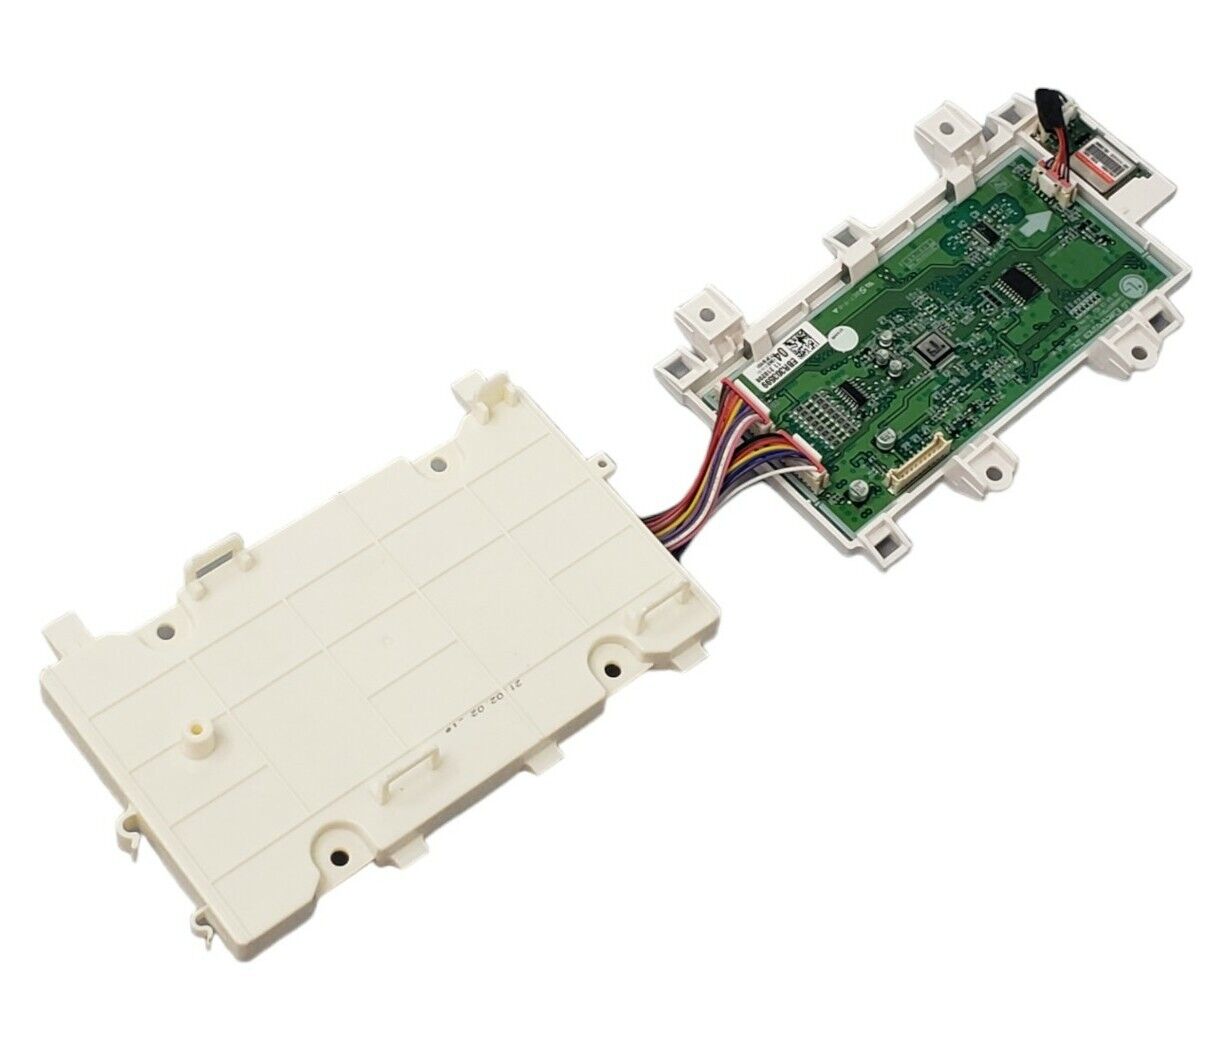 OEM Replacement for LG Dryer Display Control EBR30359904